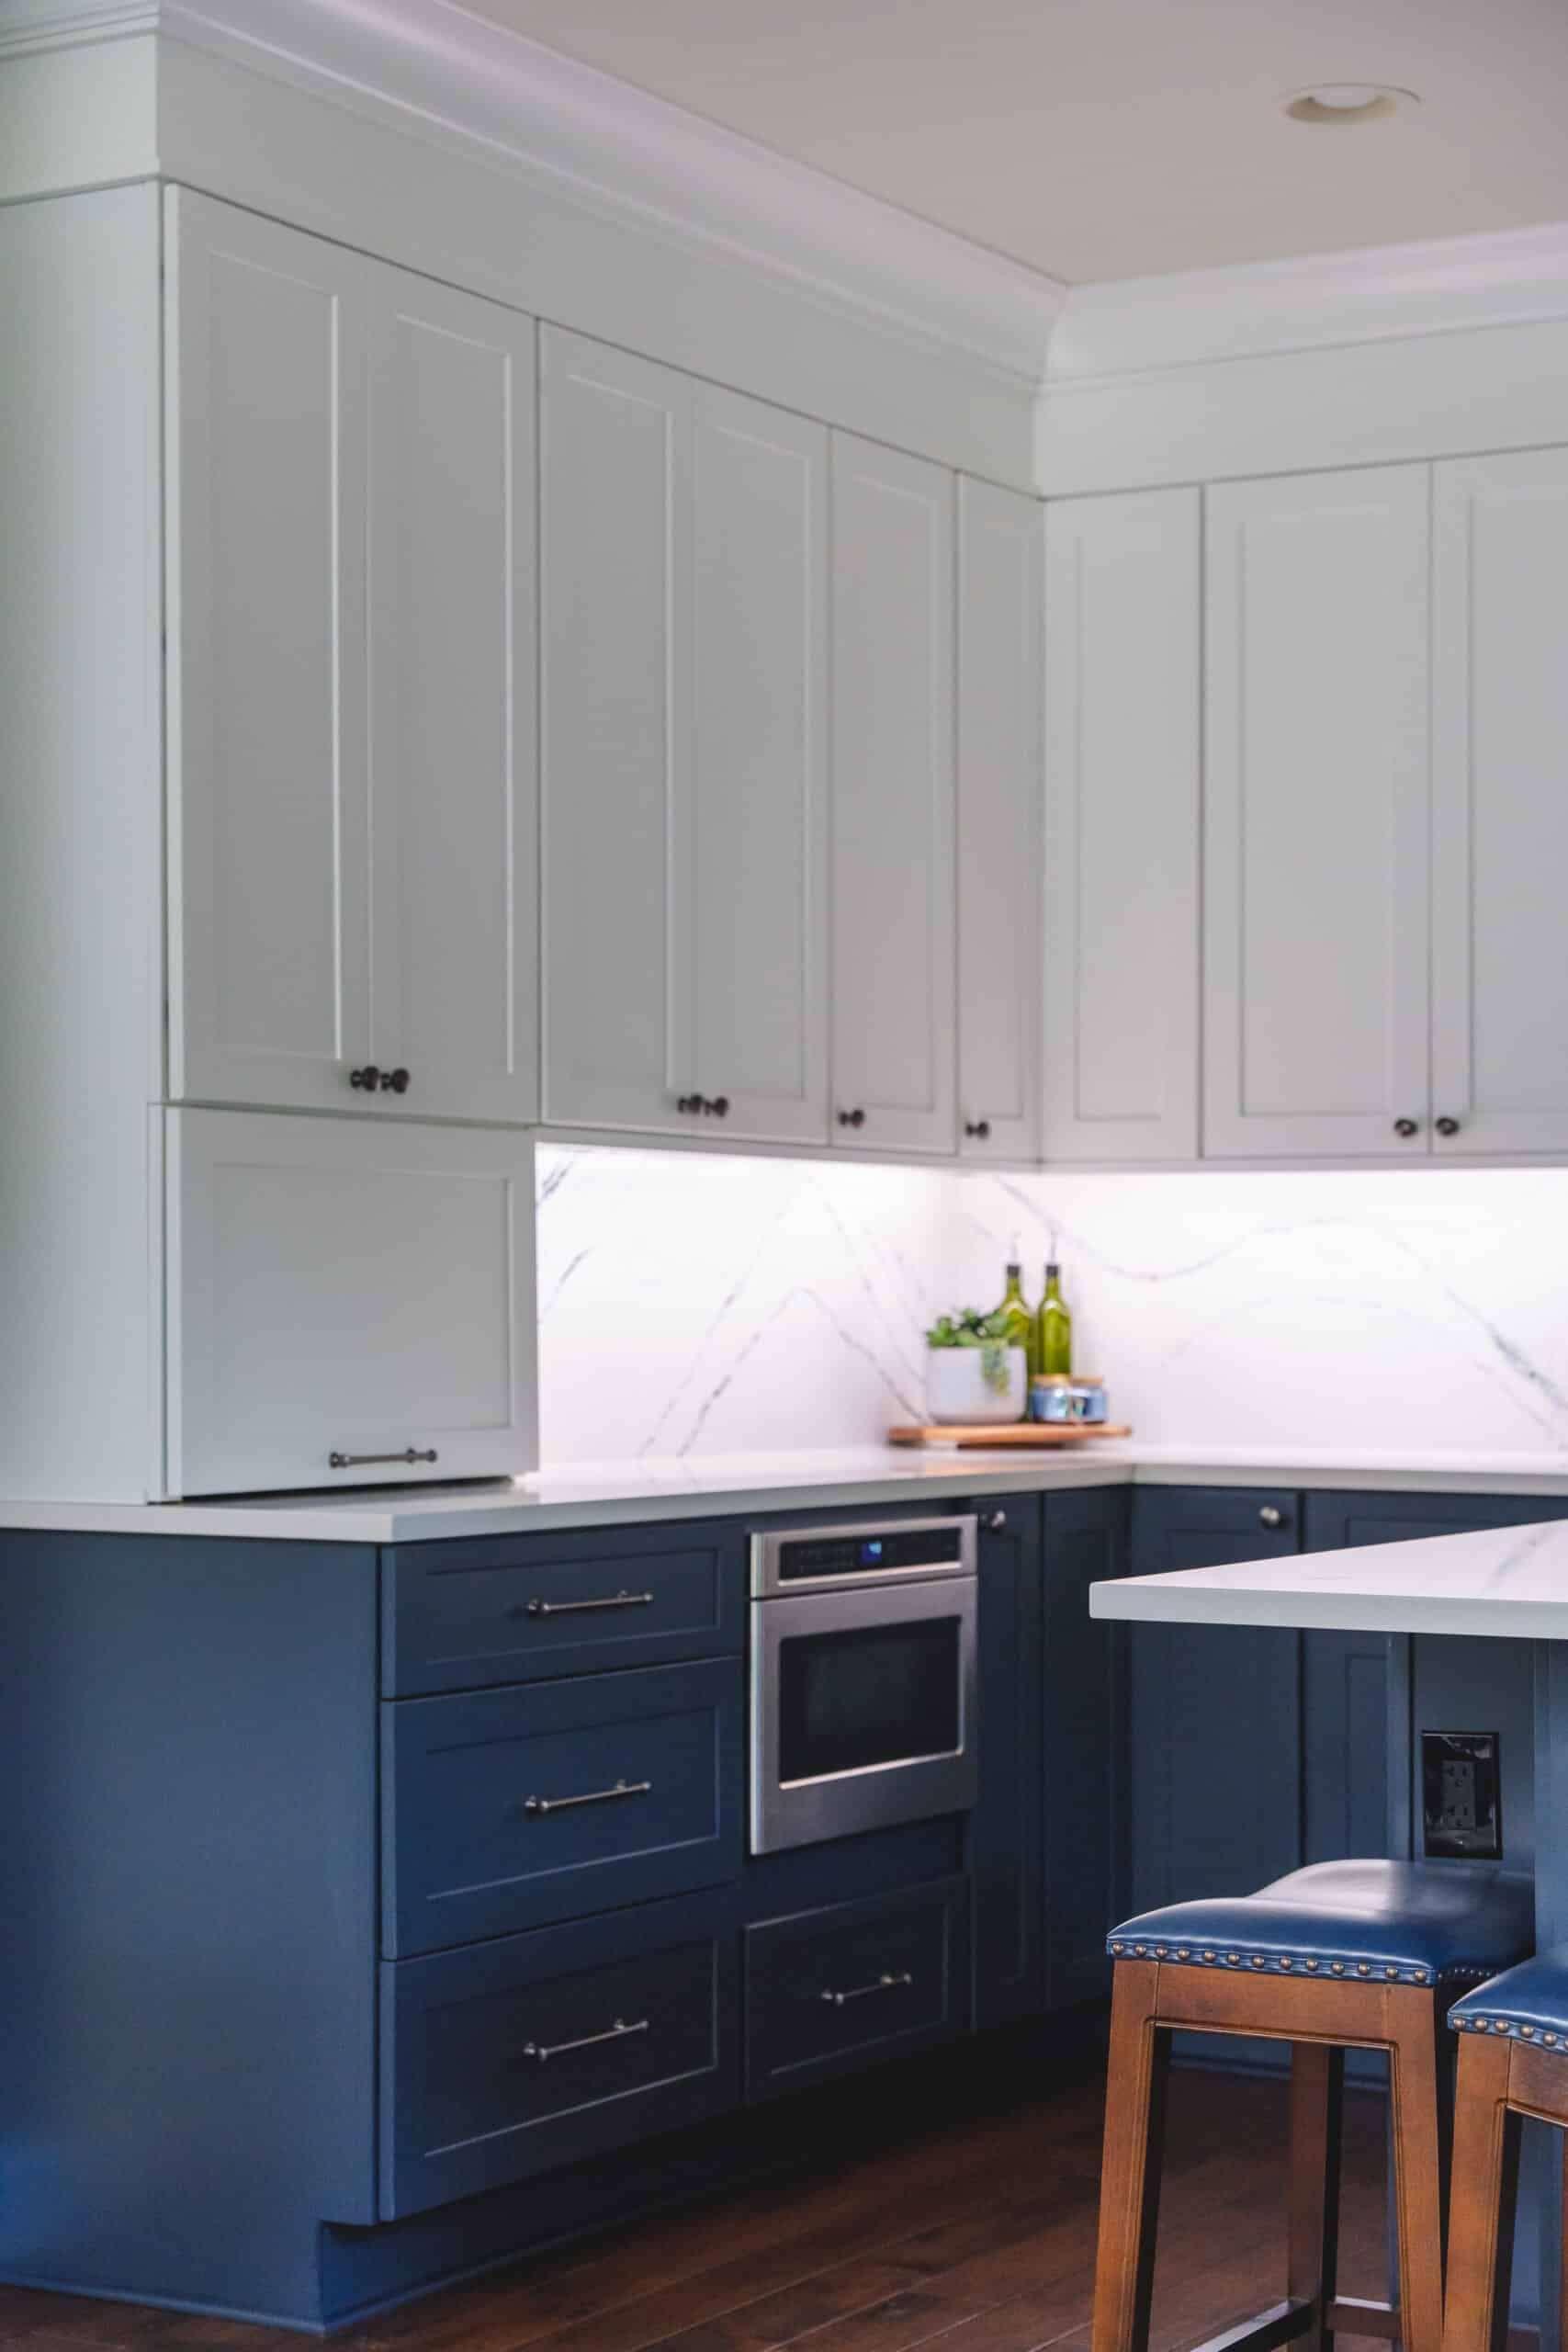 Kitchen with blue cabinets and white countertops